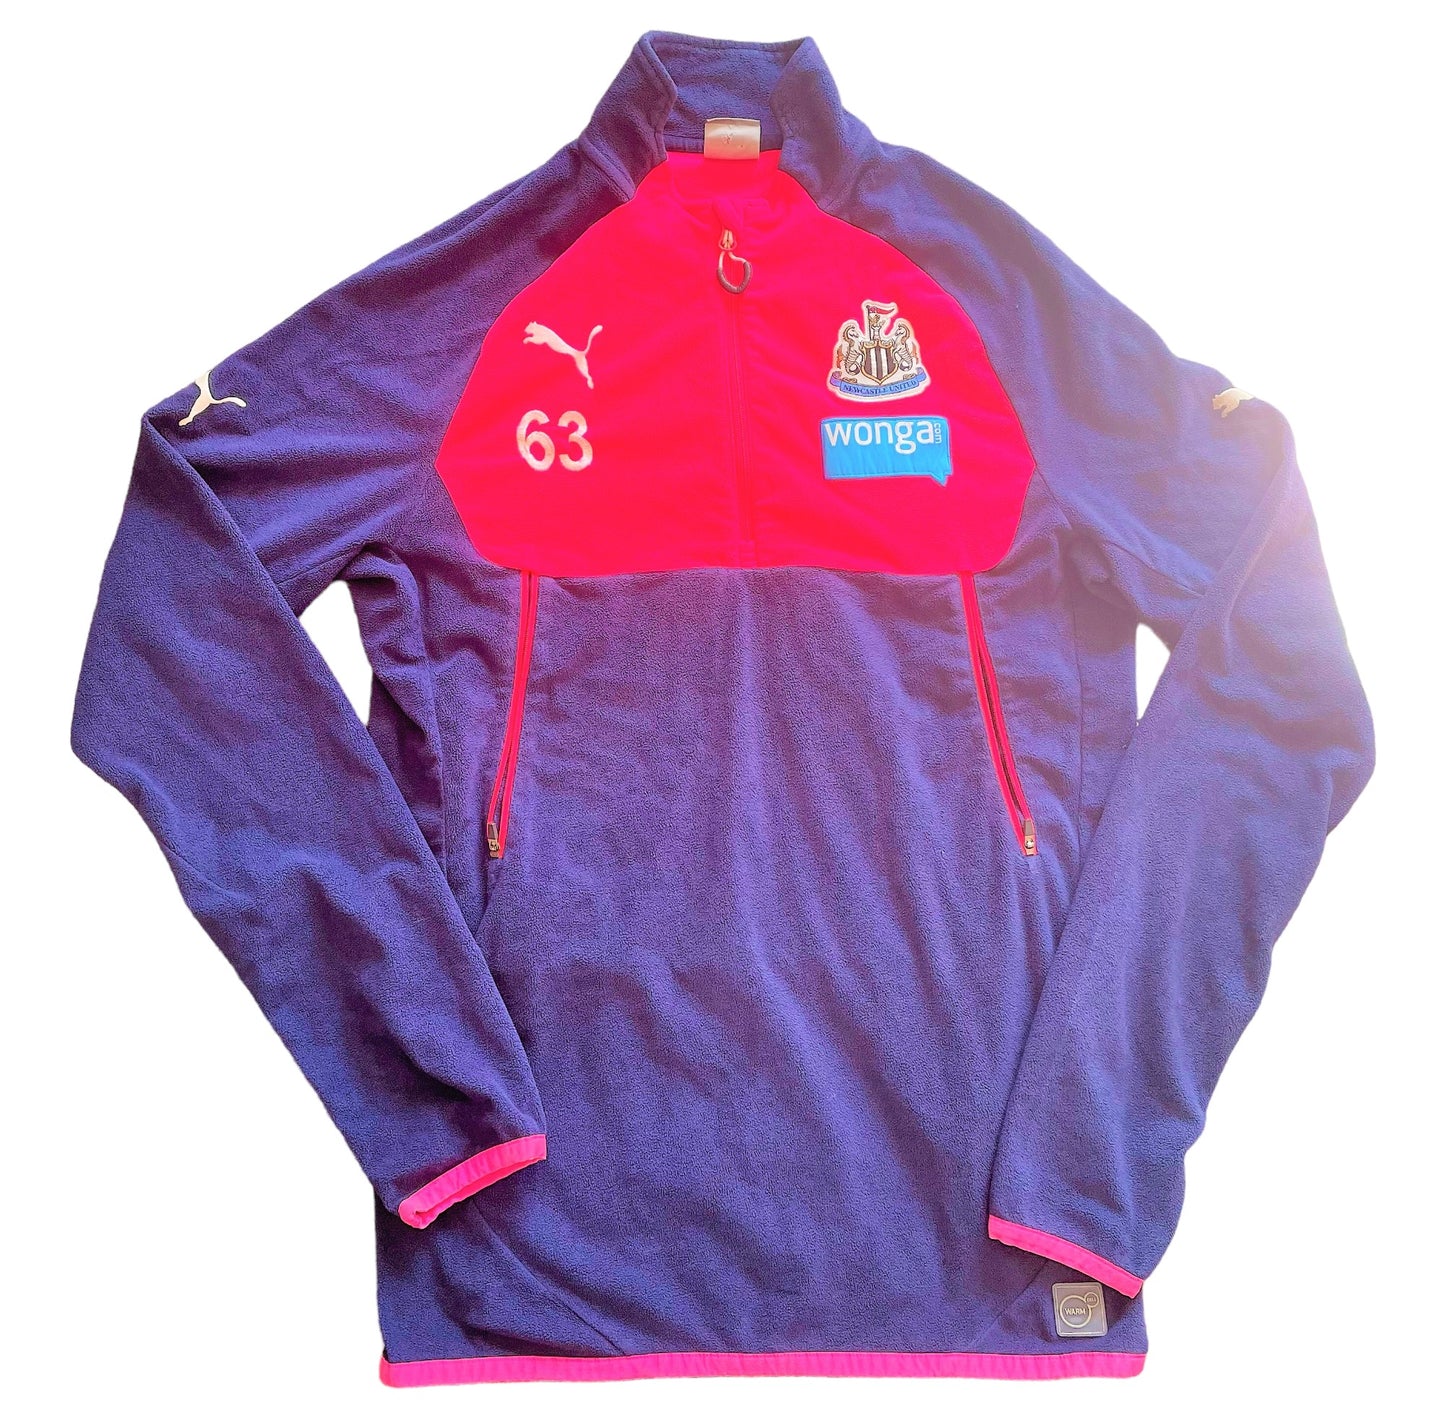 Newcastle Player Issue Micro Fleece 1/4 zip Training Top 2014 (very good) Adults Large